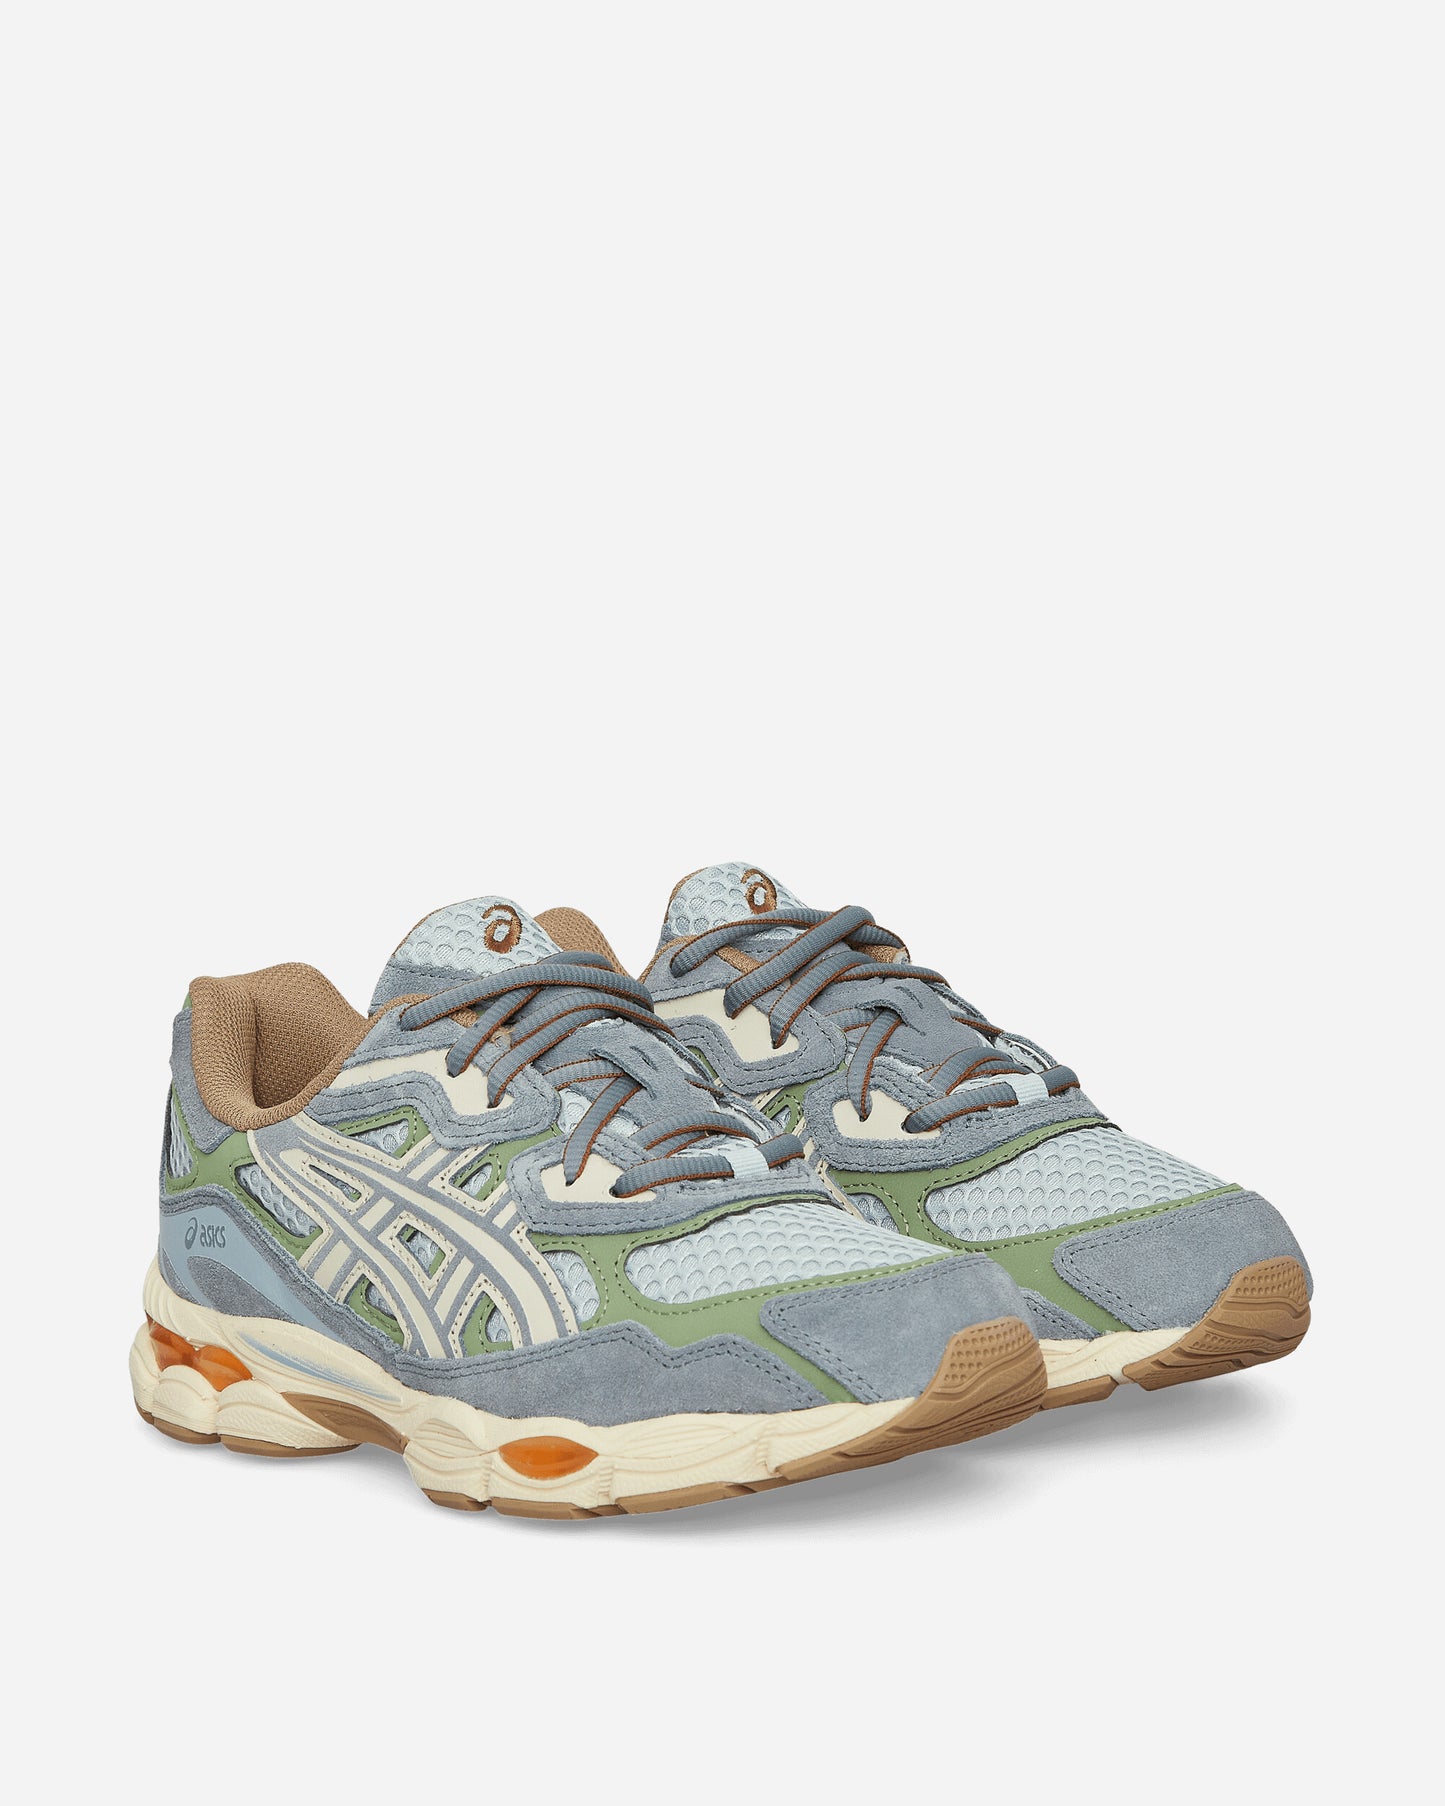 Asics Gel-Nyc Cold Moss/Fjord Grey Sneakers Low 1203A372-403